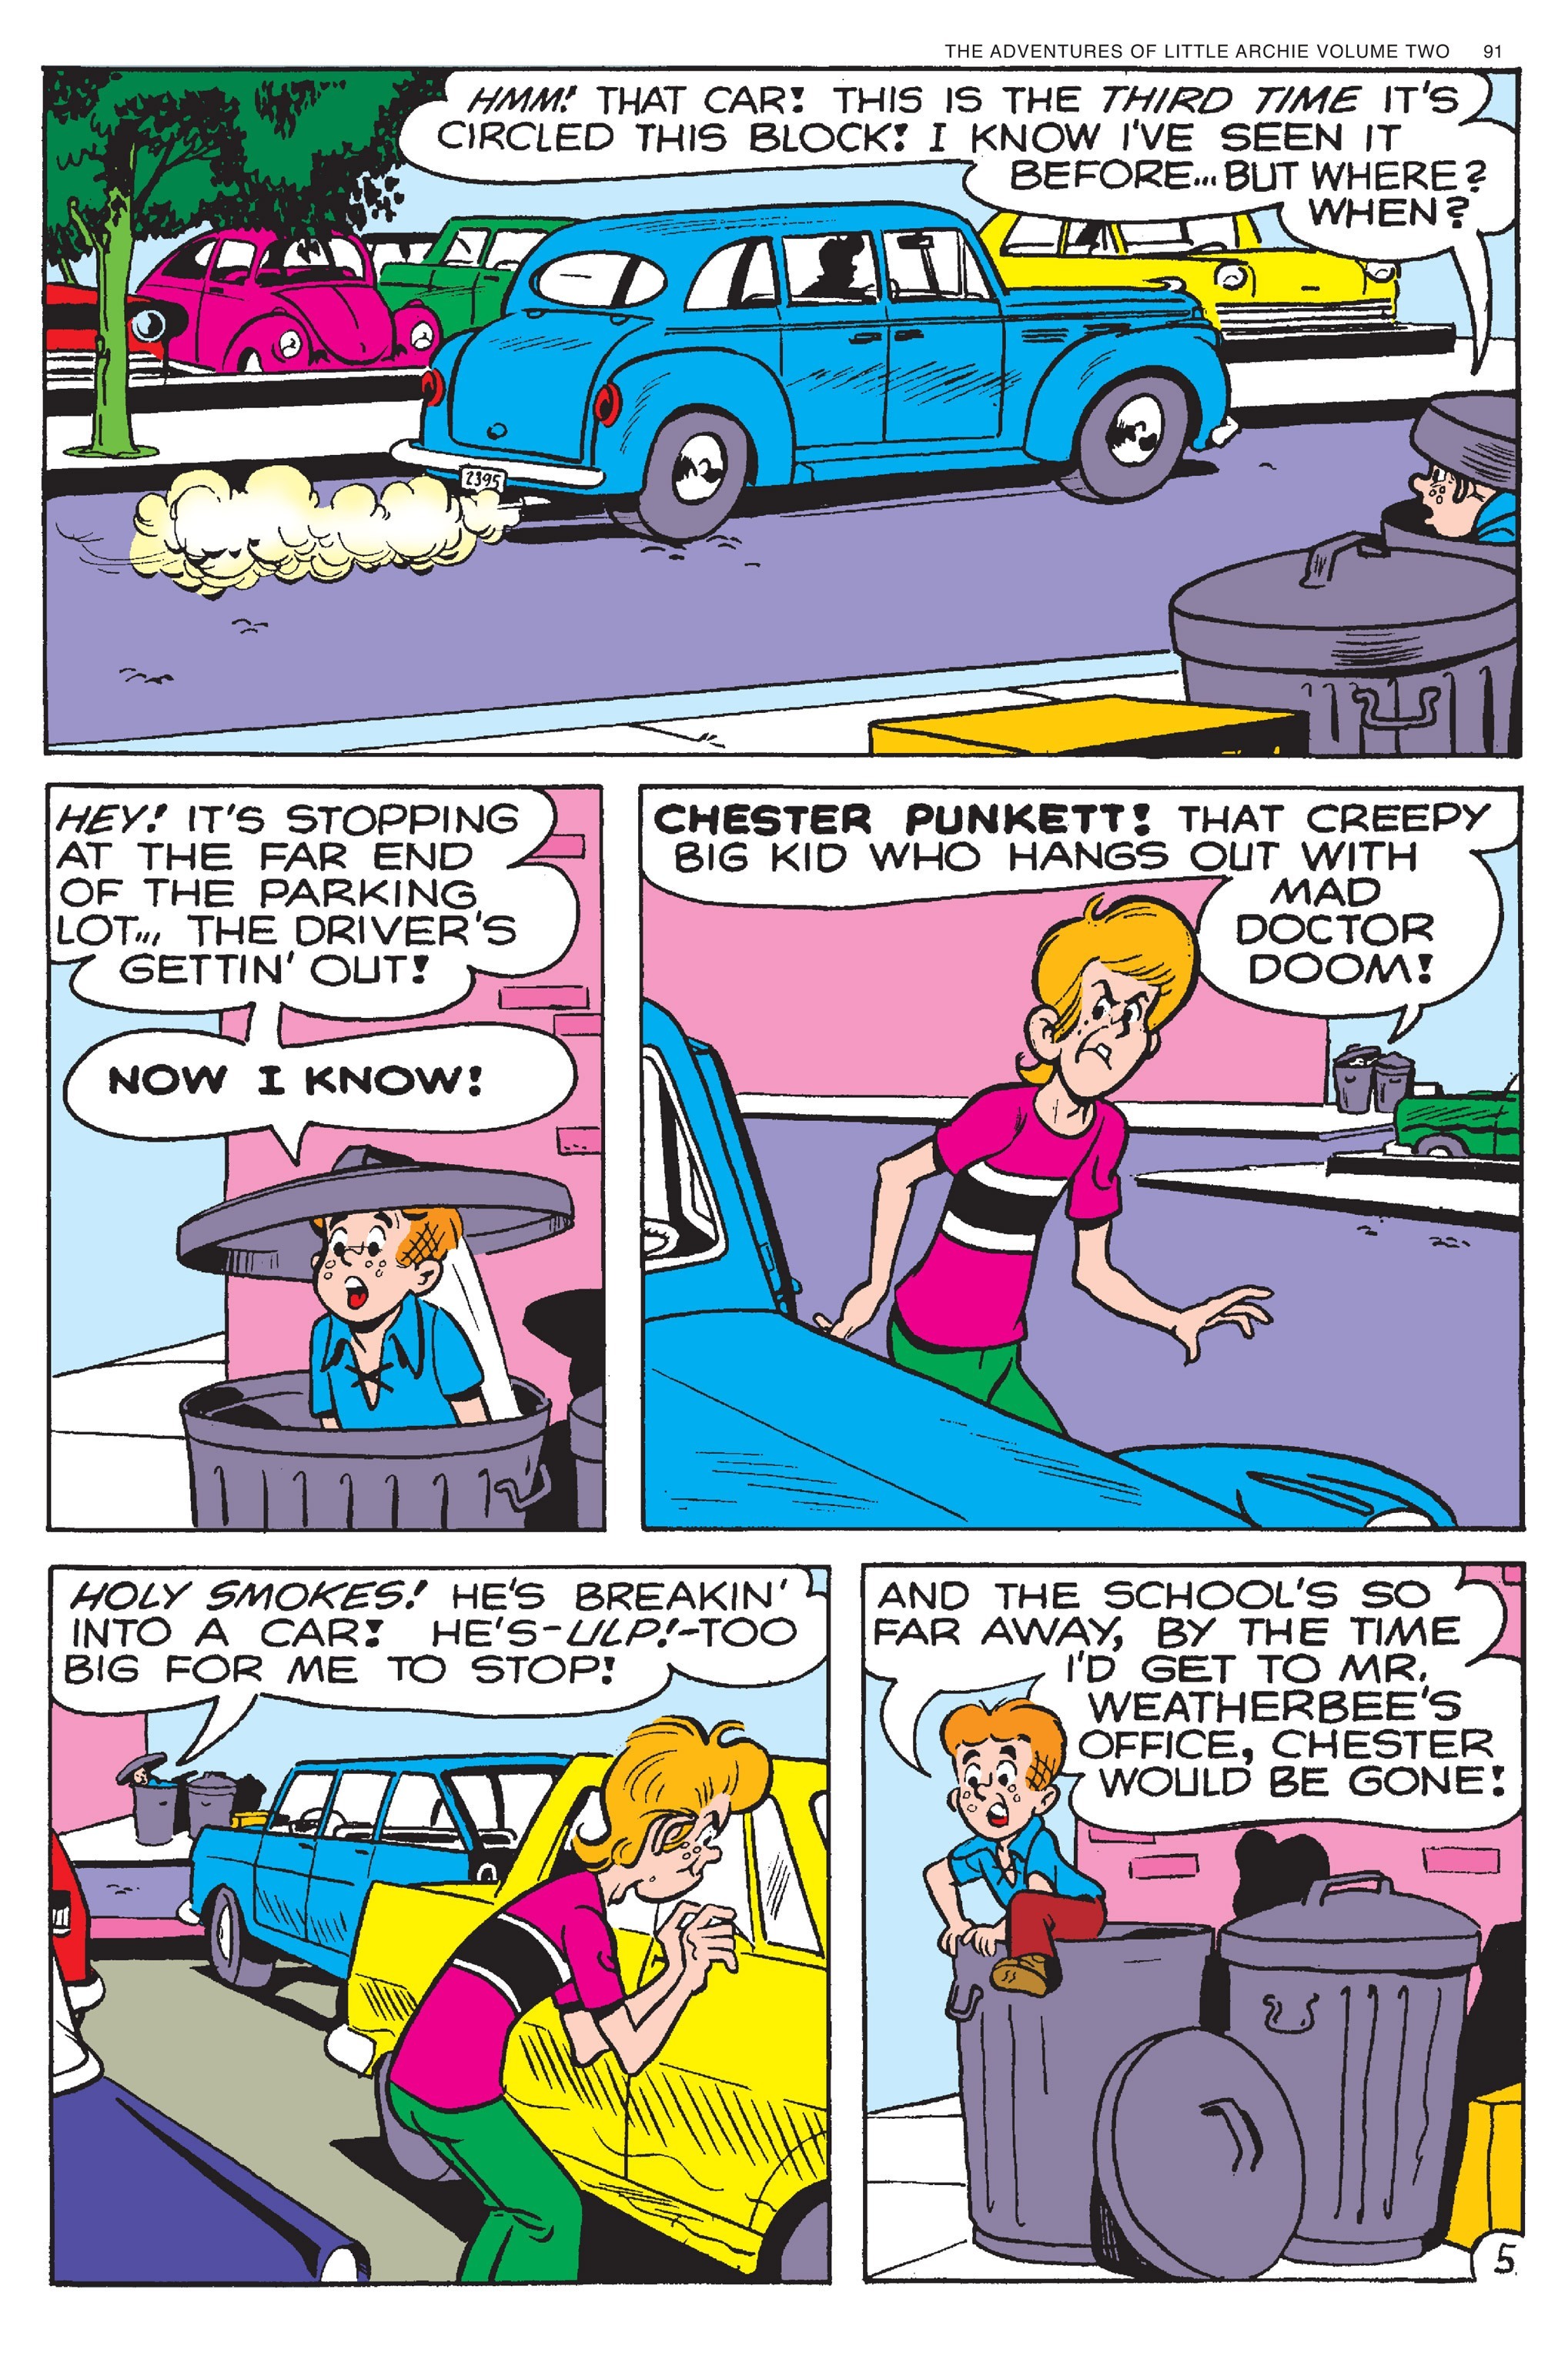 Read online Adventures of Little Archie comic -  Issue # TPB 2 - 92